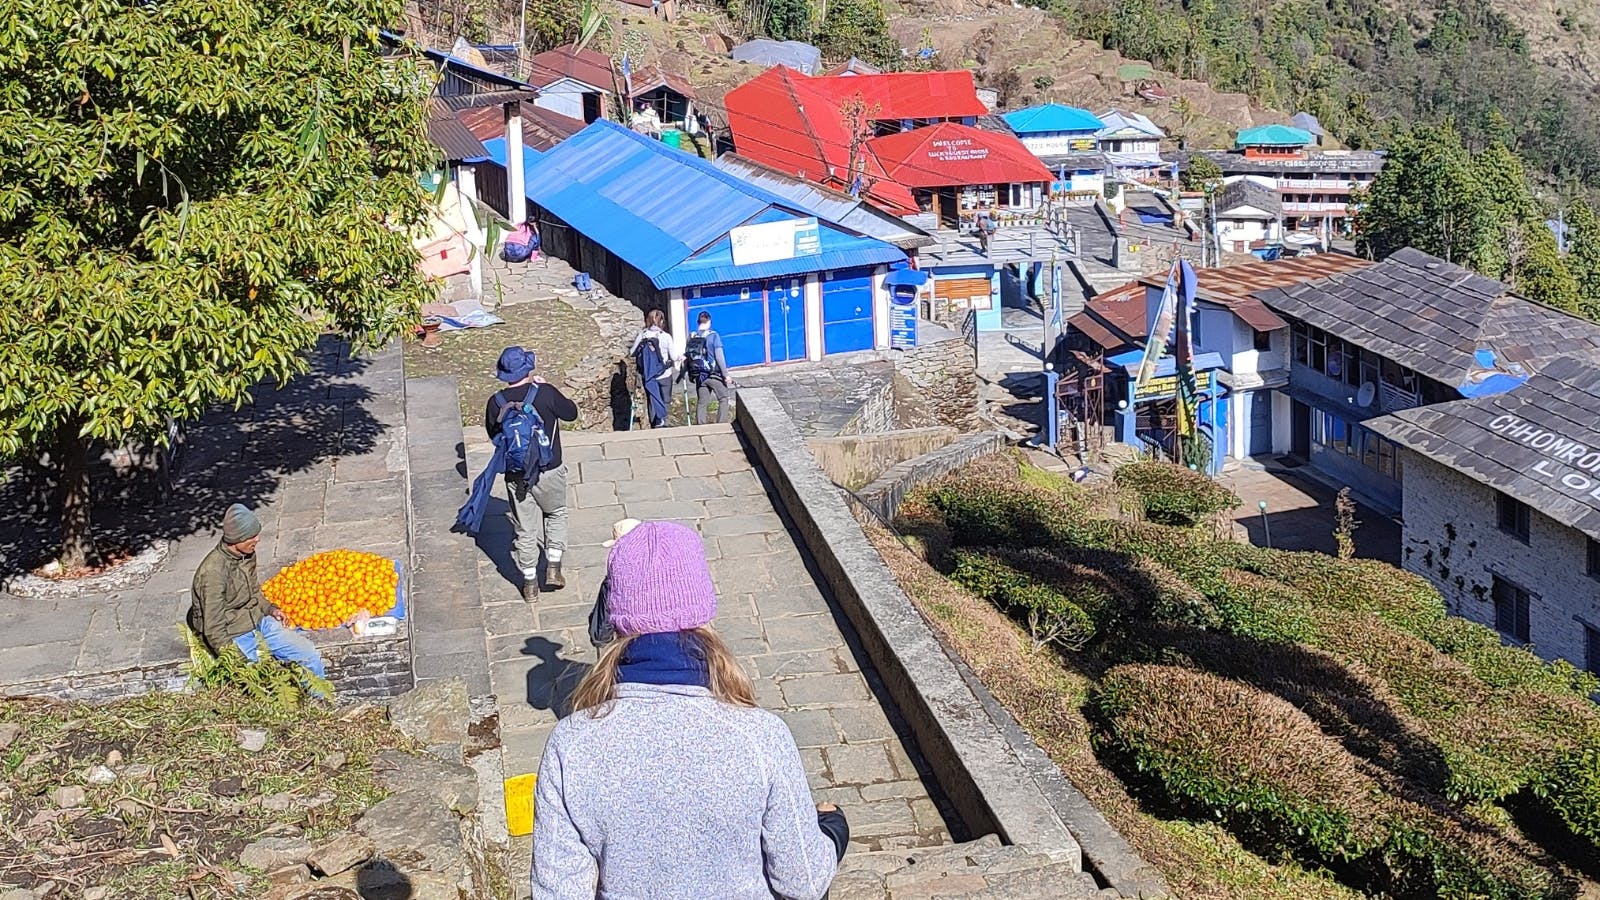 Teahouses and Steep Down Hill